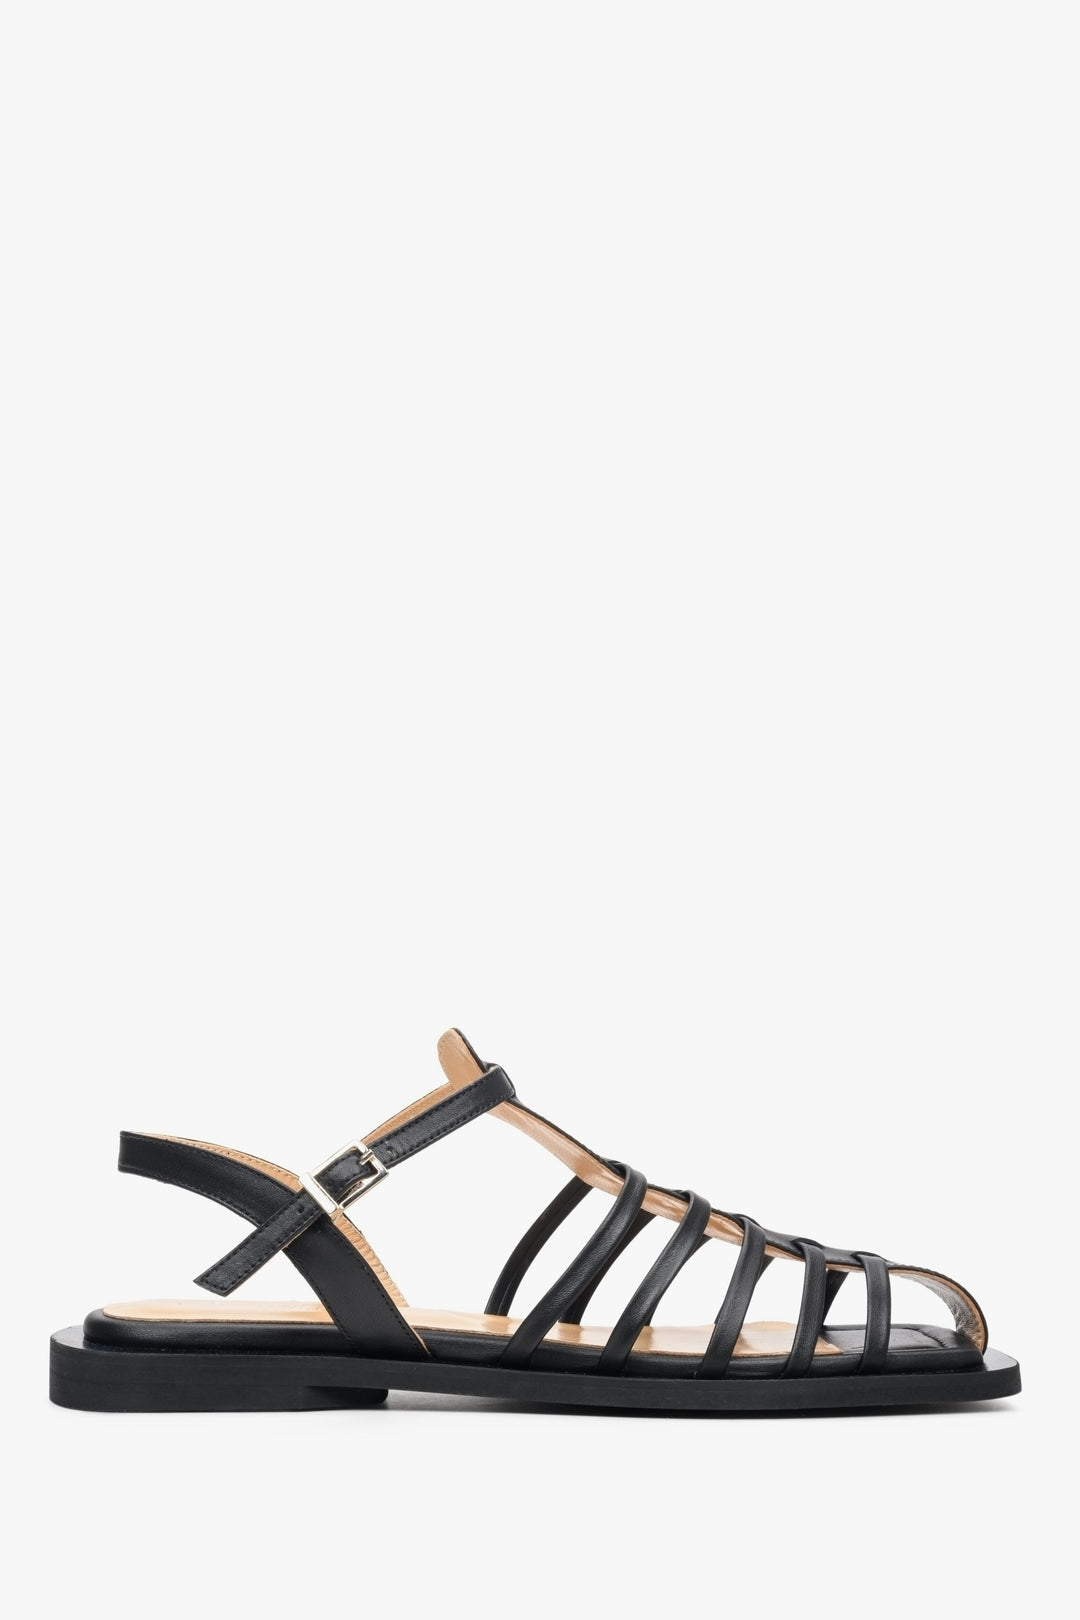 Leather black women's strappy sandals with covered toes Estro - shoe profile.